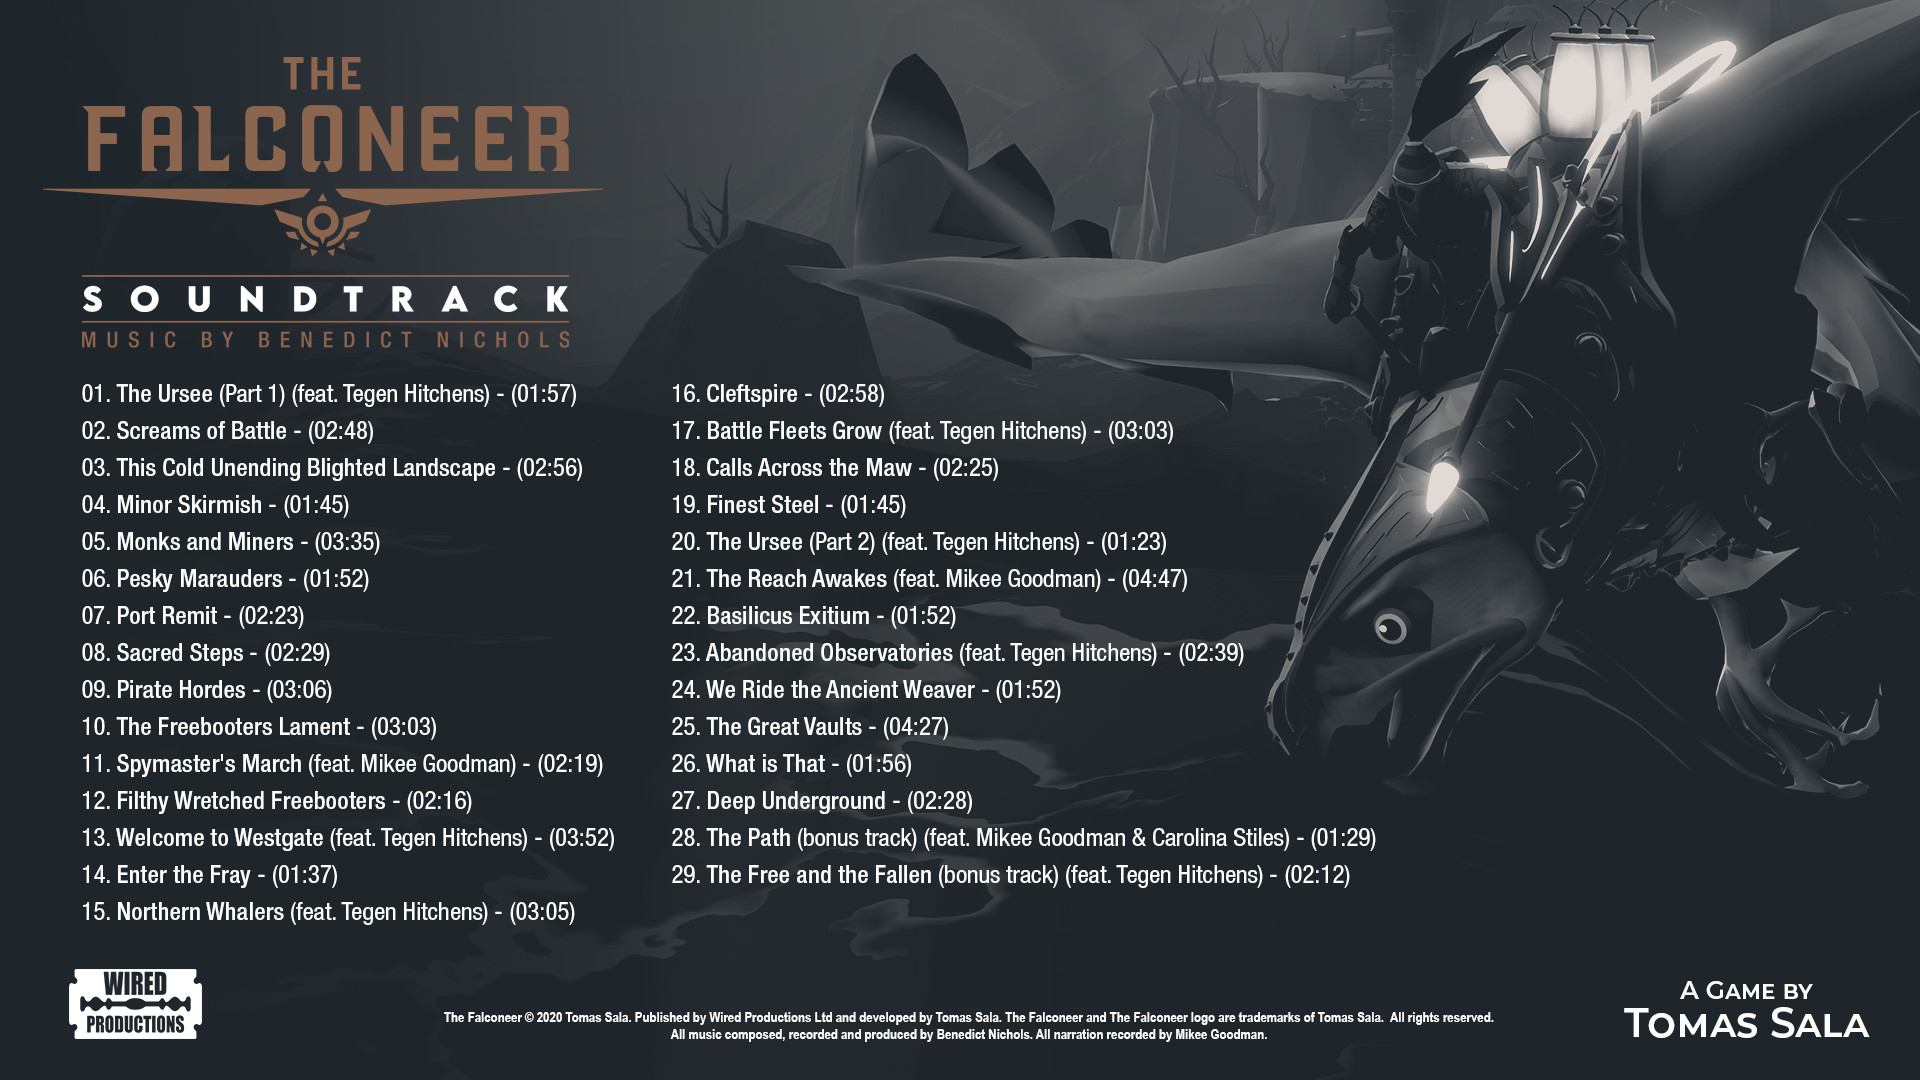 The Falconeer - Official Soundtrack Featured Screenshot #1